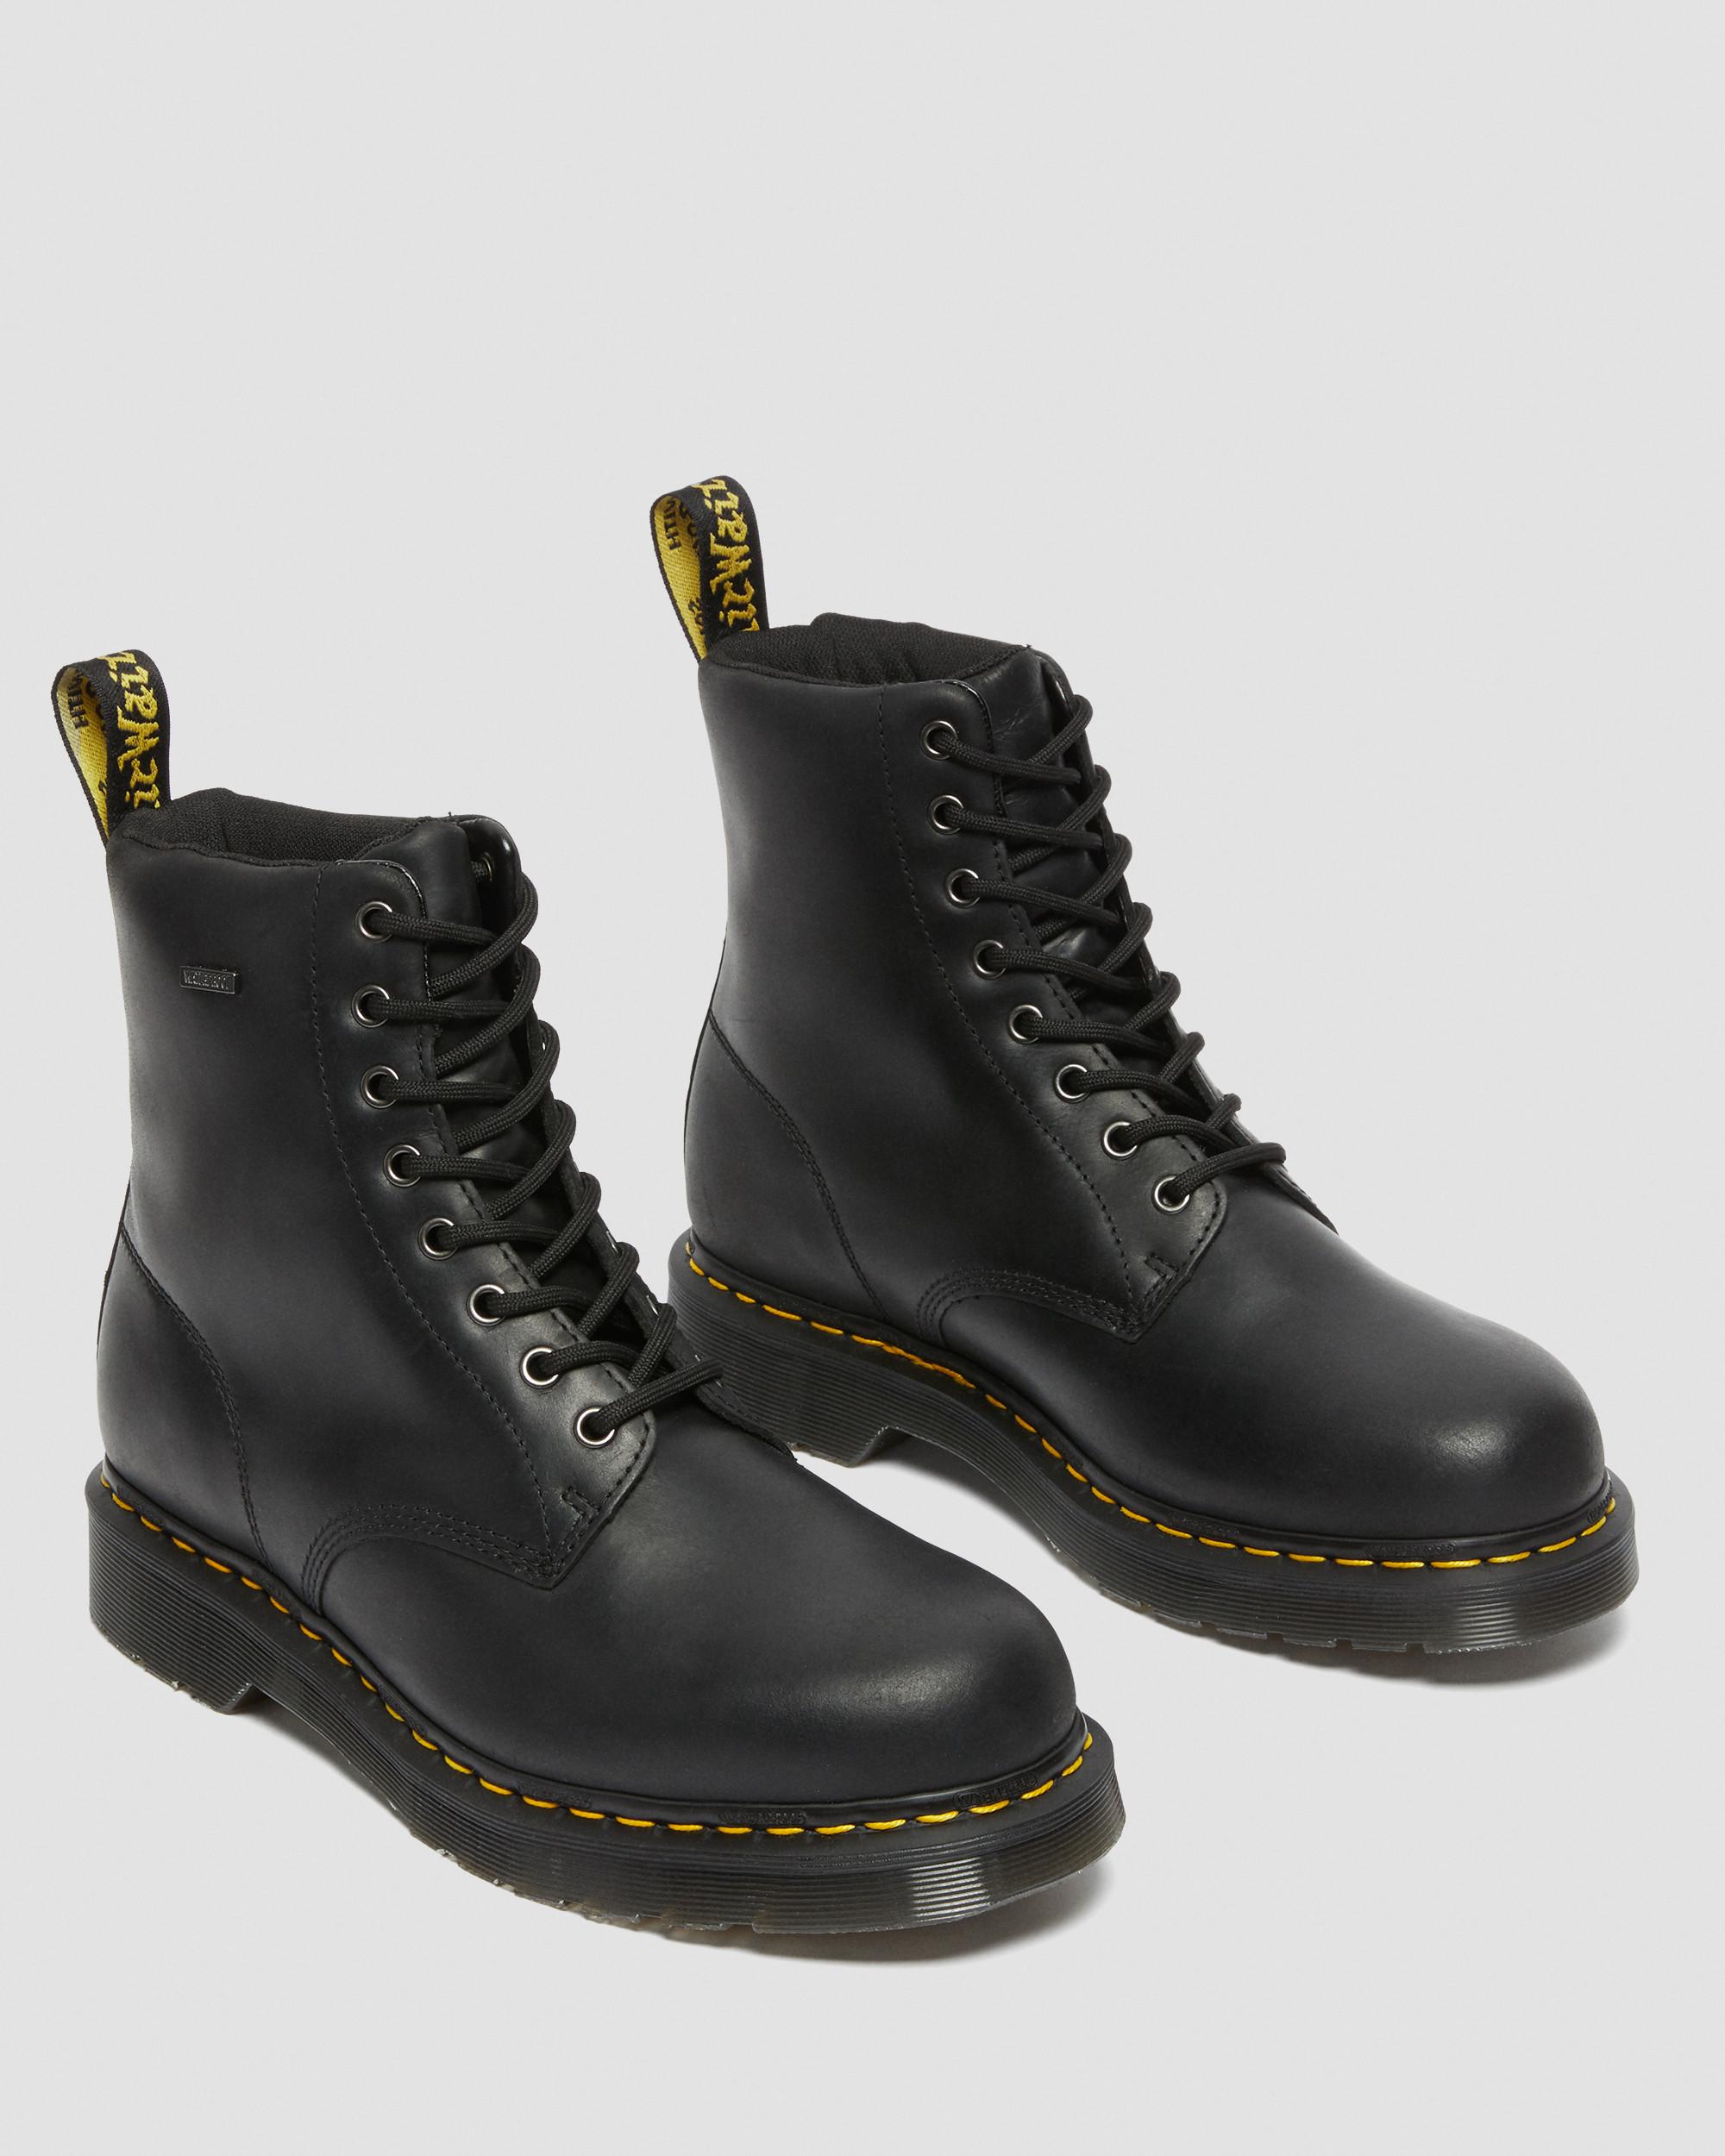 1460 WATERPROOF ANKLE BOOTS | Dr. Martens